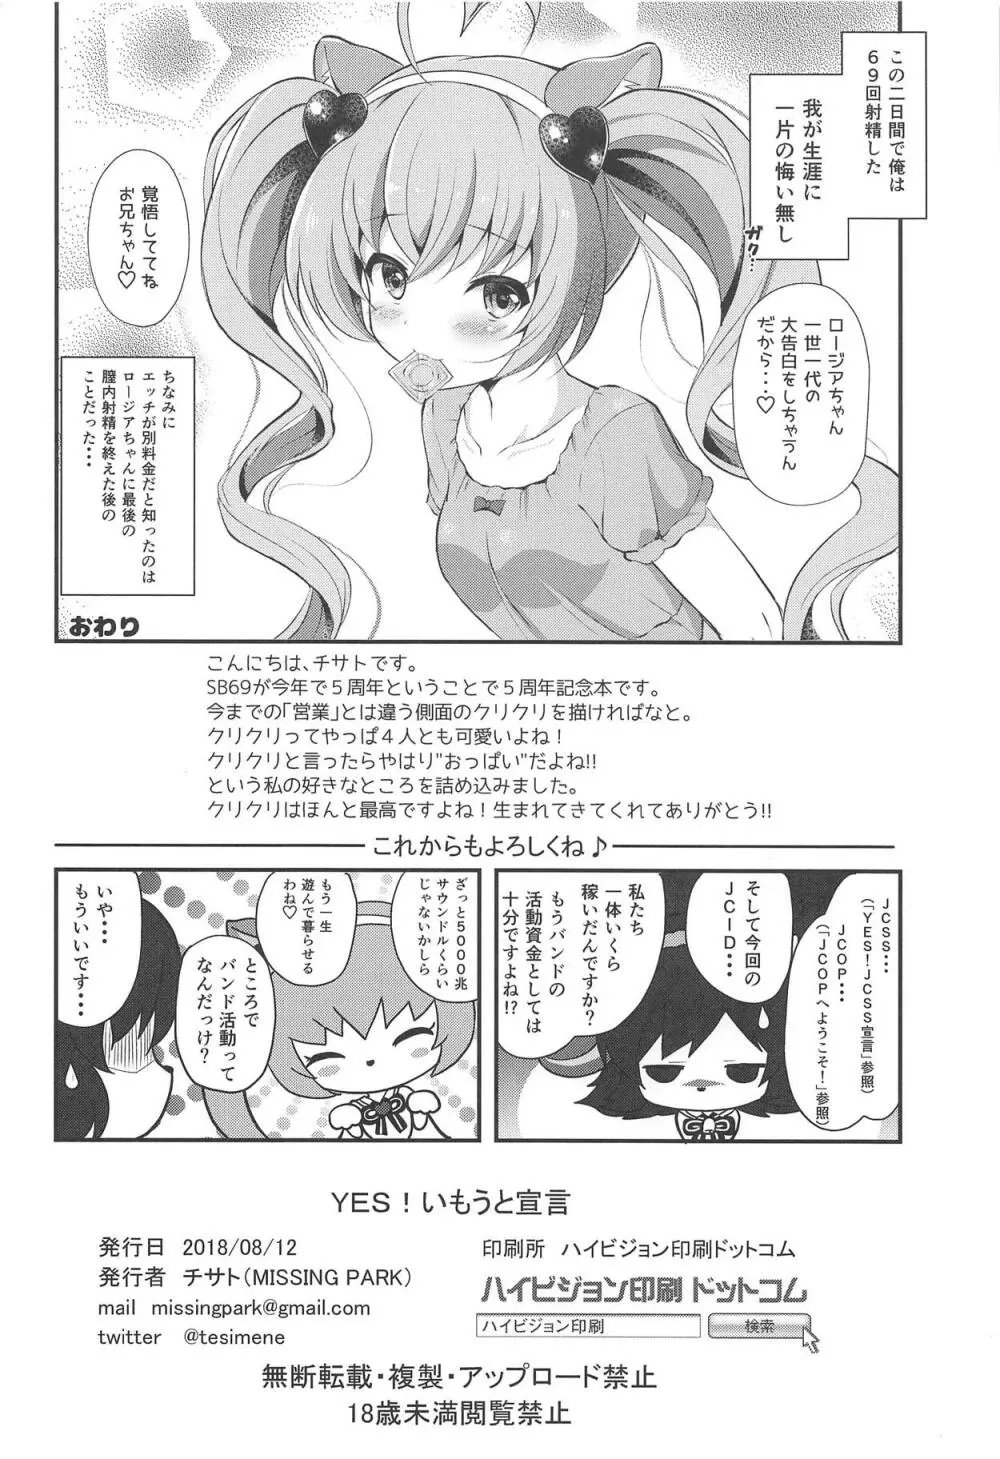 YES!いもうと宣言 Page.25